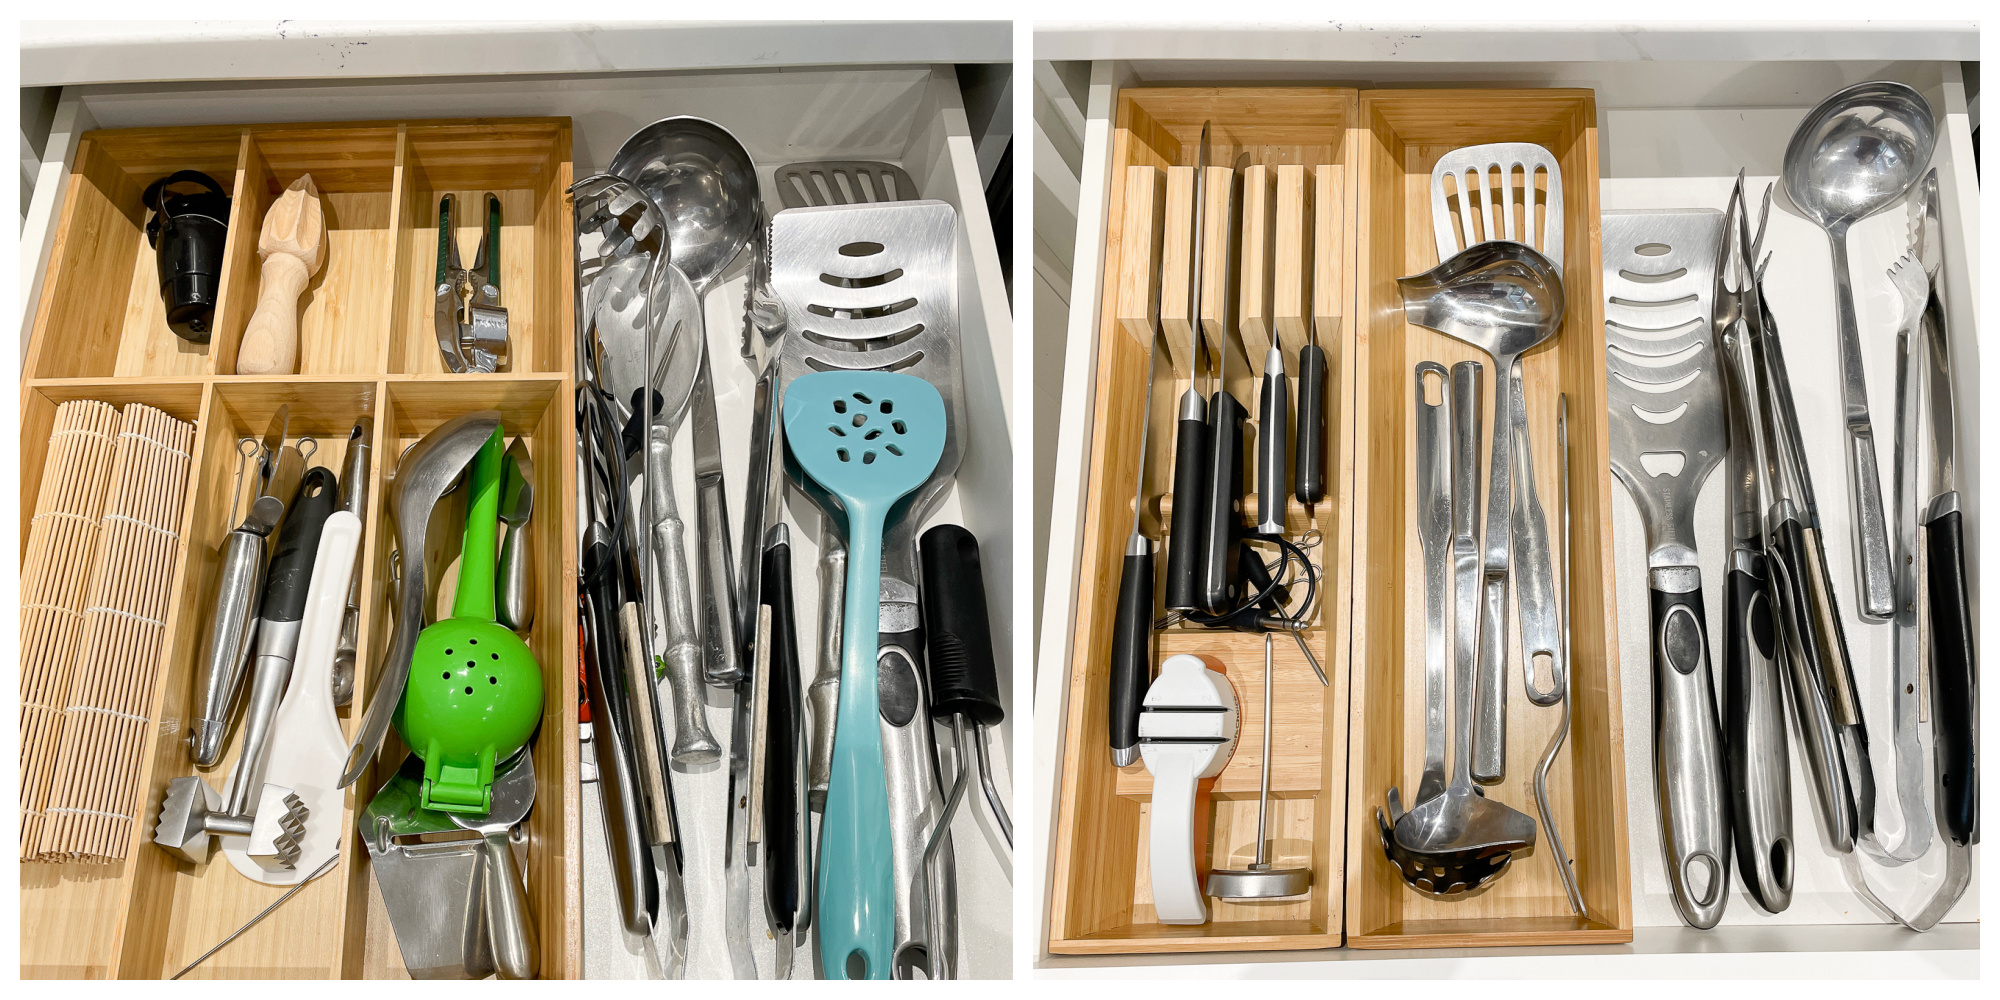 https://www.thehappyhousie.com/wp-content/uploads/2022/01/before-and-after-utensil-drawer.jpg